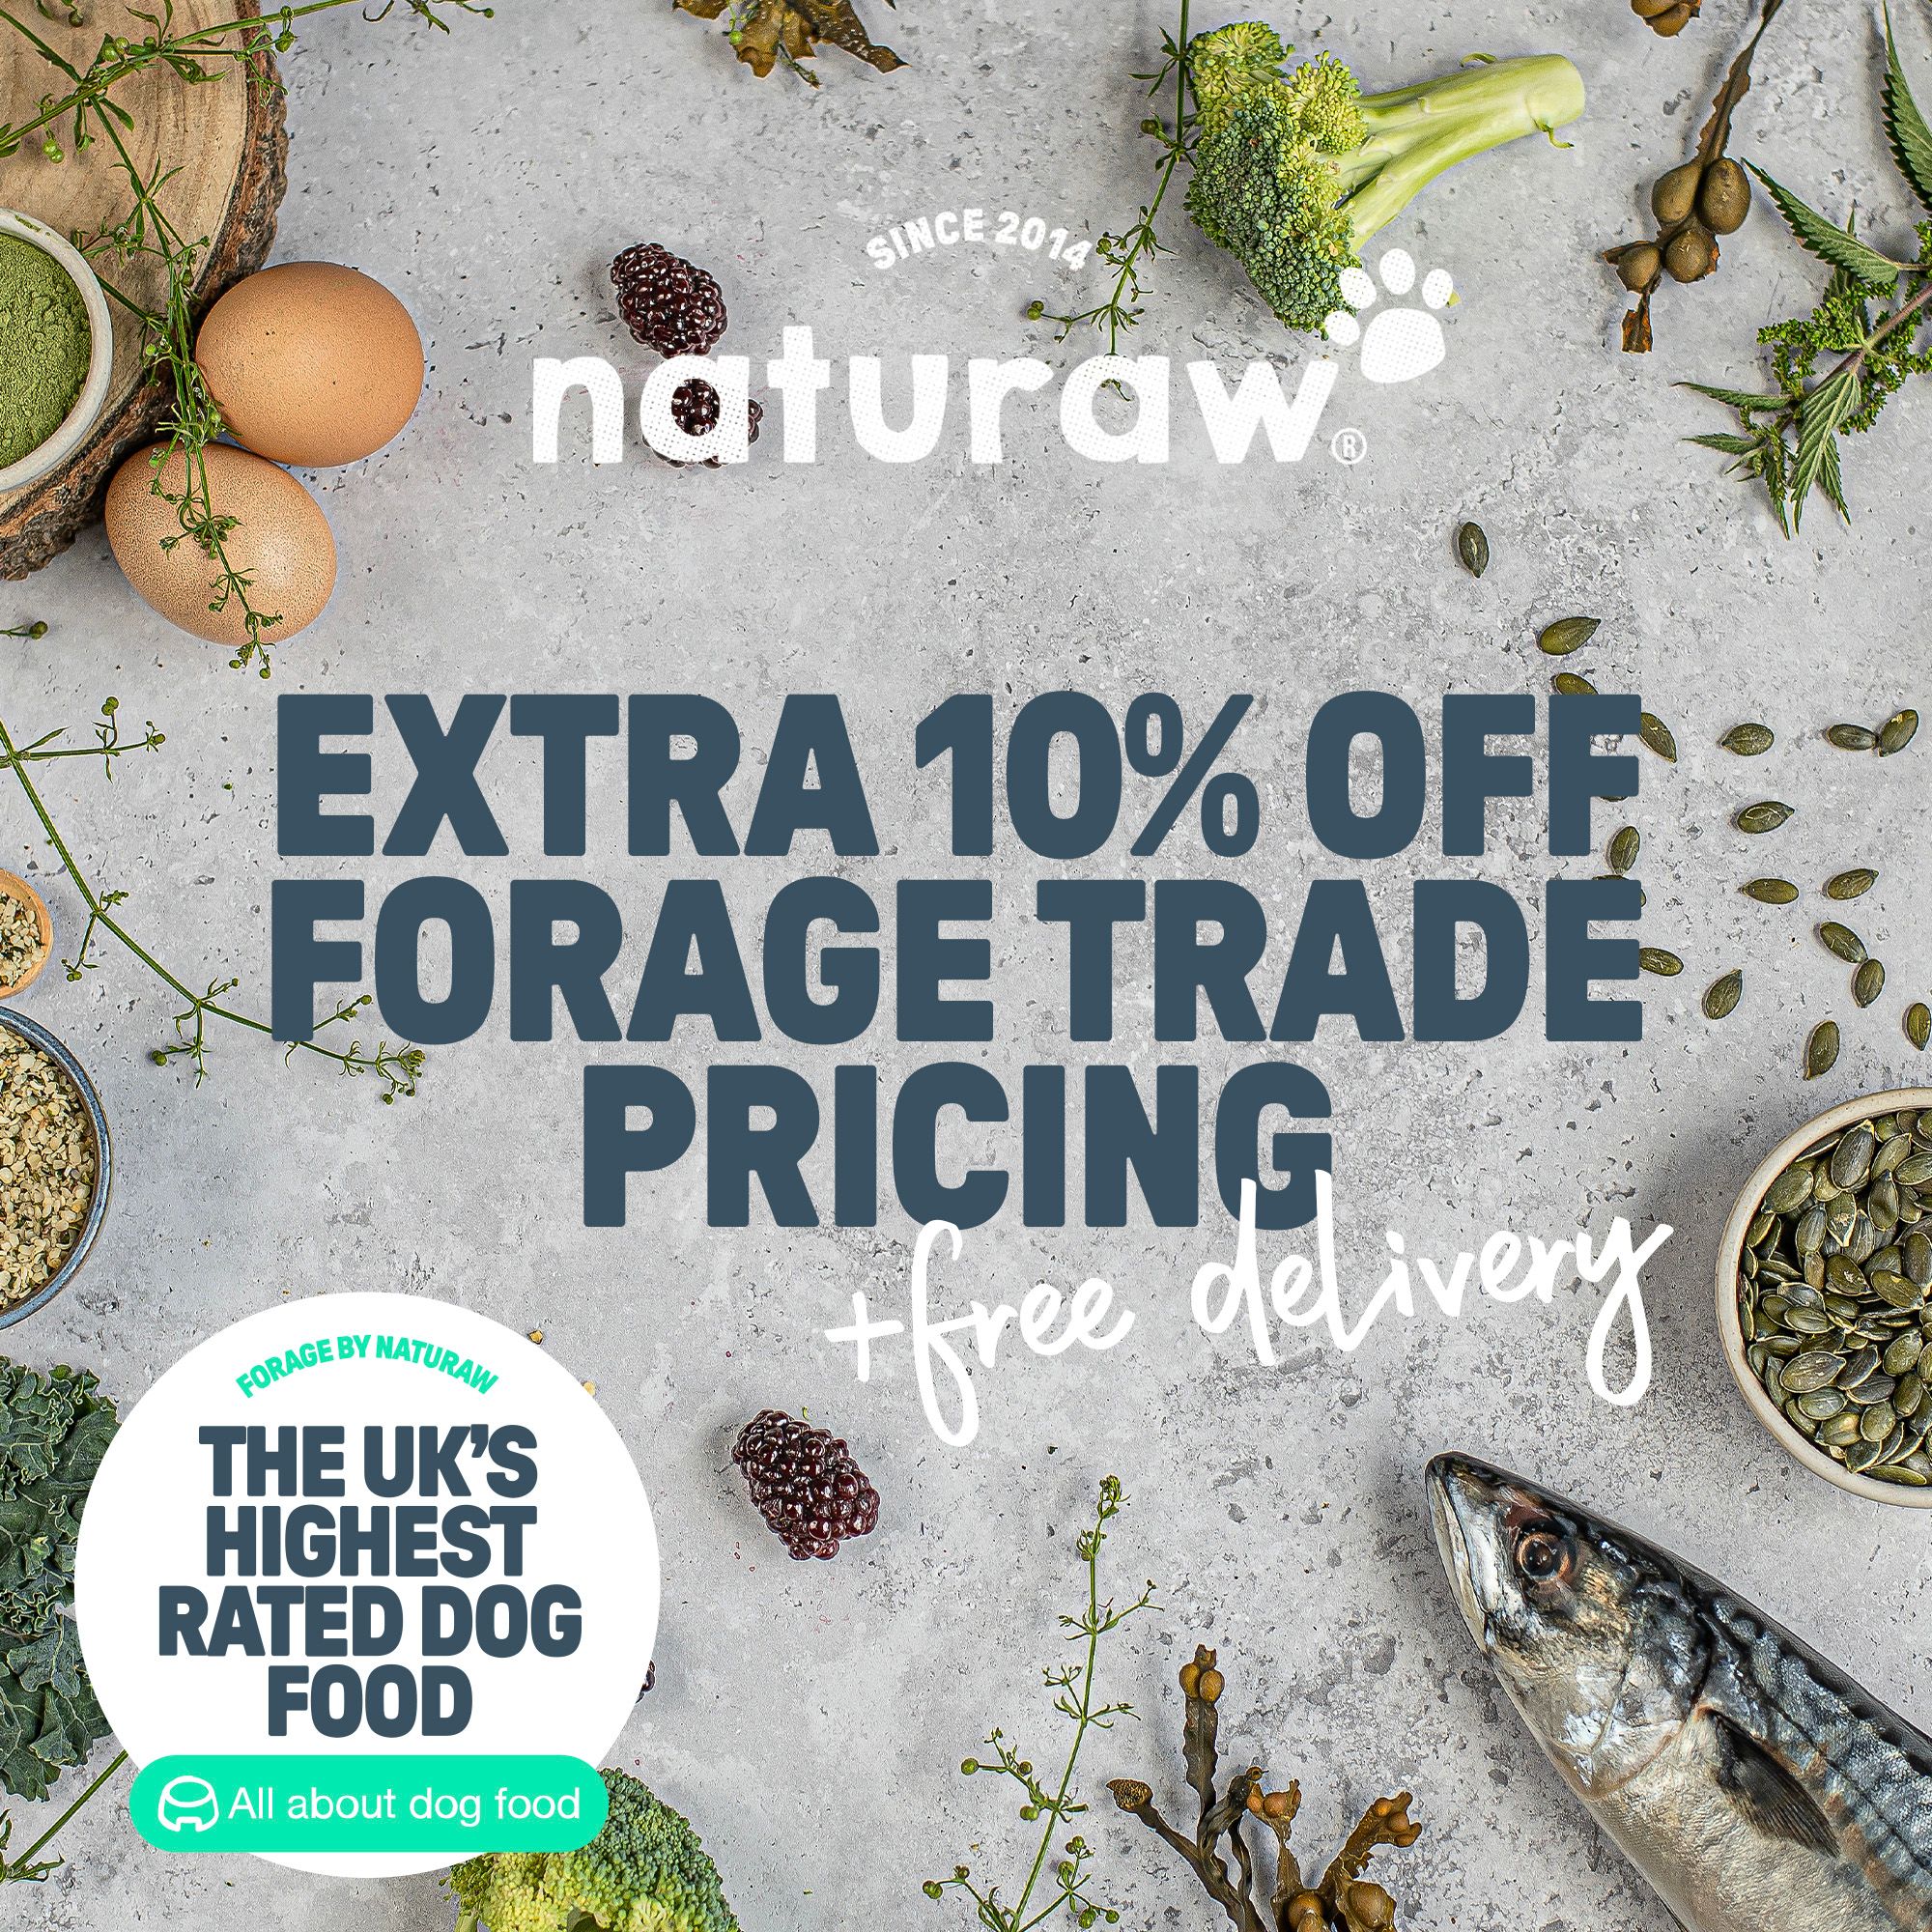 Extra 10% OFF Forage trade pricing +FREE DELIVERY